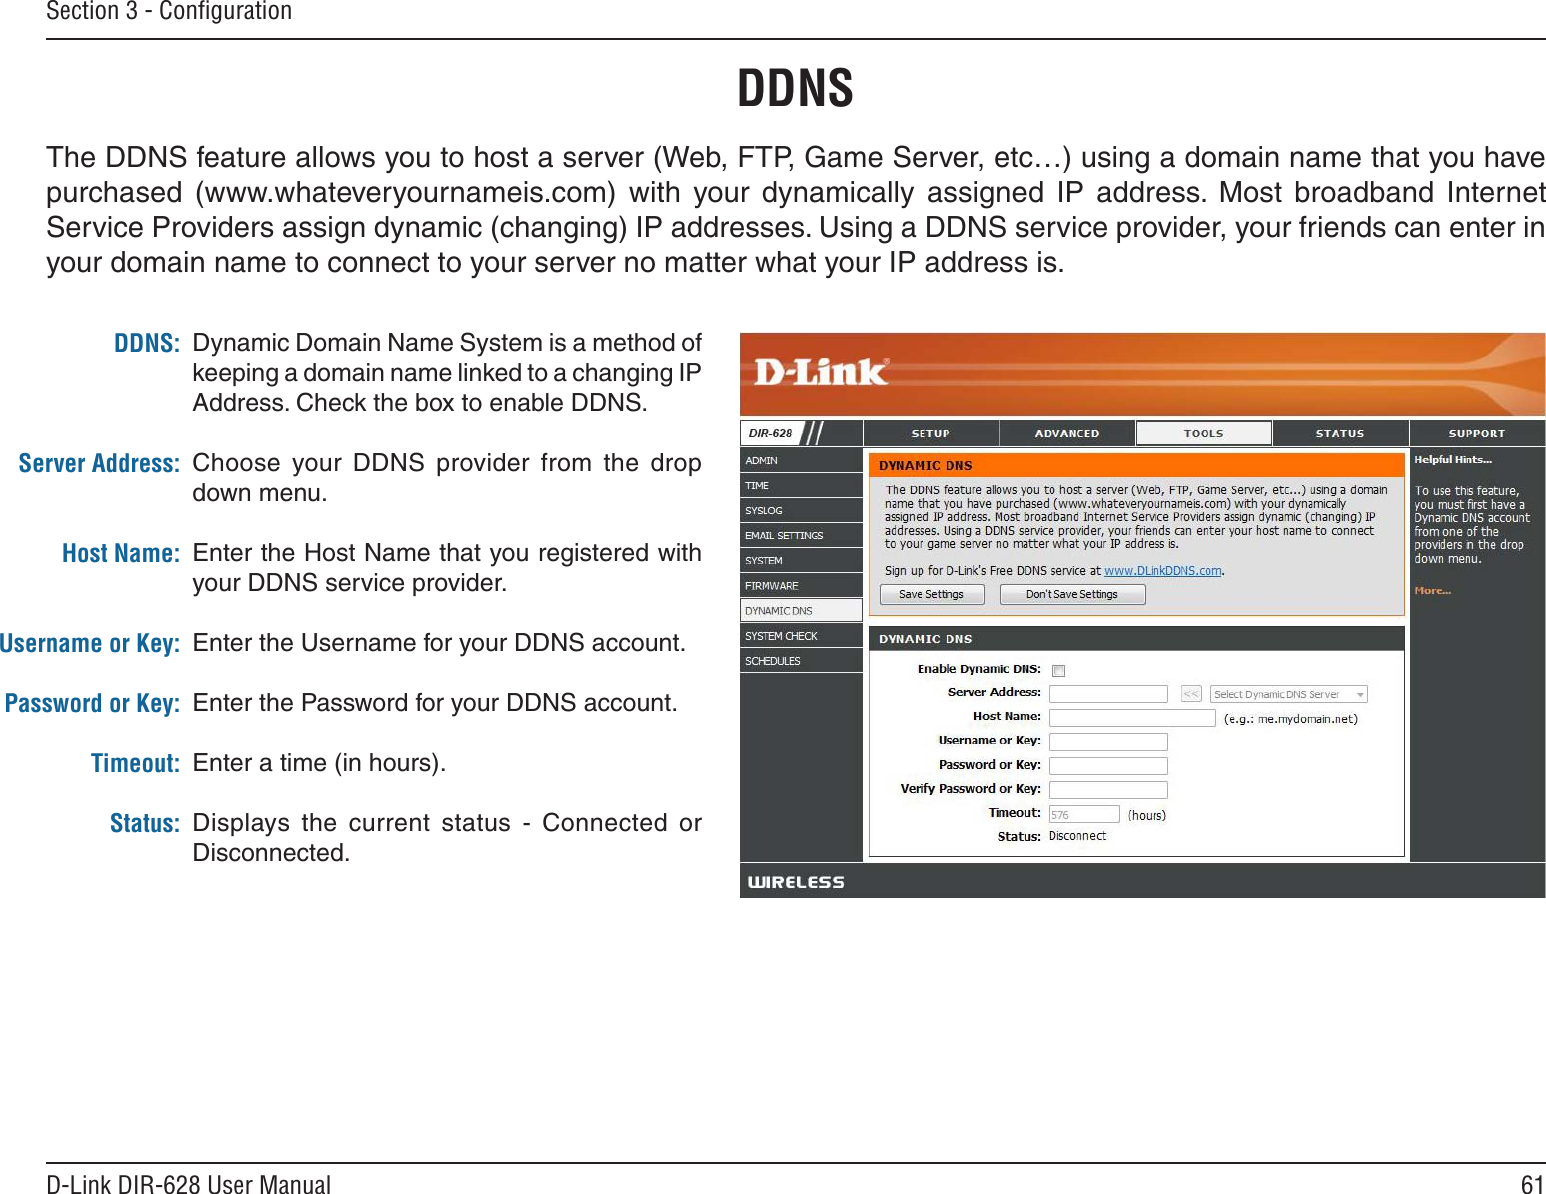 61D-Link DIR-628 User ManualSection 3 - ConﬁgurationDynamic Domain Name System is a method of keeping a domain name linked to a changing IP Address. Check the box to enable DDNS.Choose  your  DDNS  provider  from  the  drop down menu.Enter the Host Name that you registered with your DDNS service provider.Enter the Username for your DDNS account.Enter the Password for your DDNS account.Enter a time (in hours).Displays  the  current  status  -  Connected  or Disconnected.DDNS:Server Address:Host Name:Username or Key:Password or Key:Timeout:Status:DDNSThe DDNS feature allows you to host a server (Web, FTP, Game Server, etc…) using a domain name that you have purchased  (www.whateveryournameis.com)  with  your  dynamically  assigned  IP  address.  Most  broadband  Internet Service Providers assign dynamic (changing) IP addresses. Using a DDNS service provider, your friends can enter in your domain name to connect to your server no matter what your IP address is.